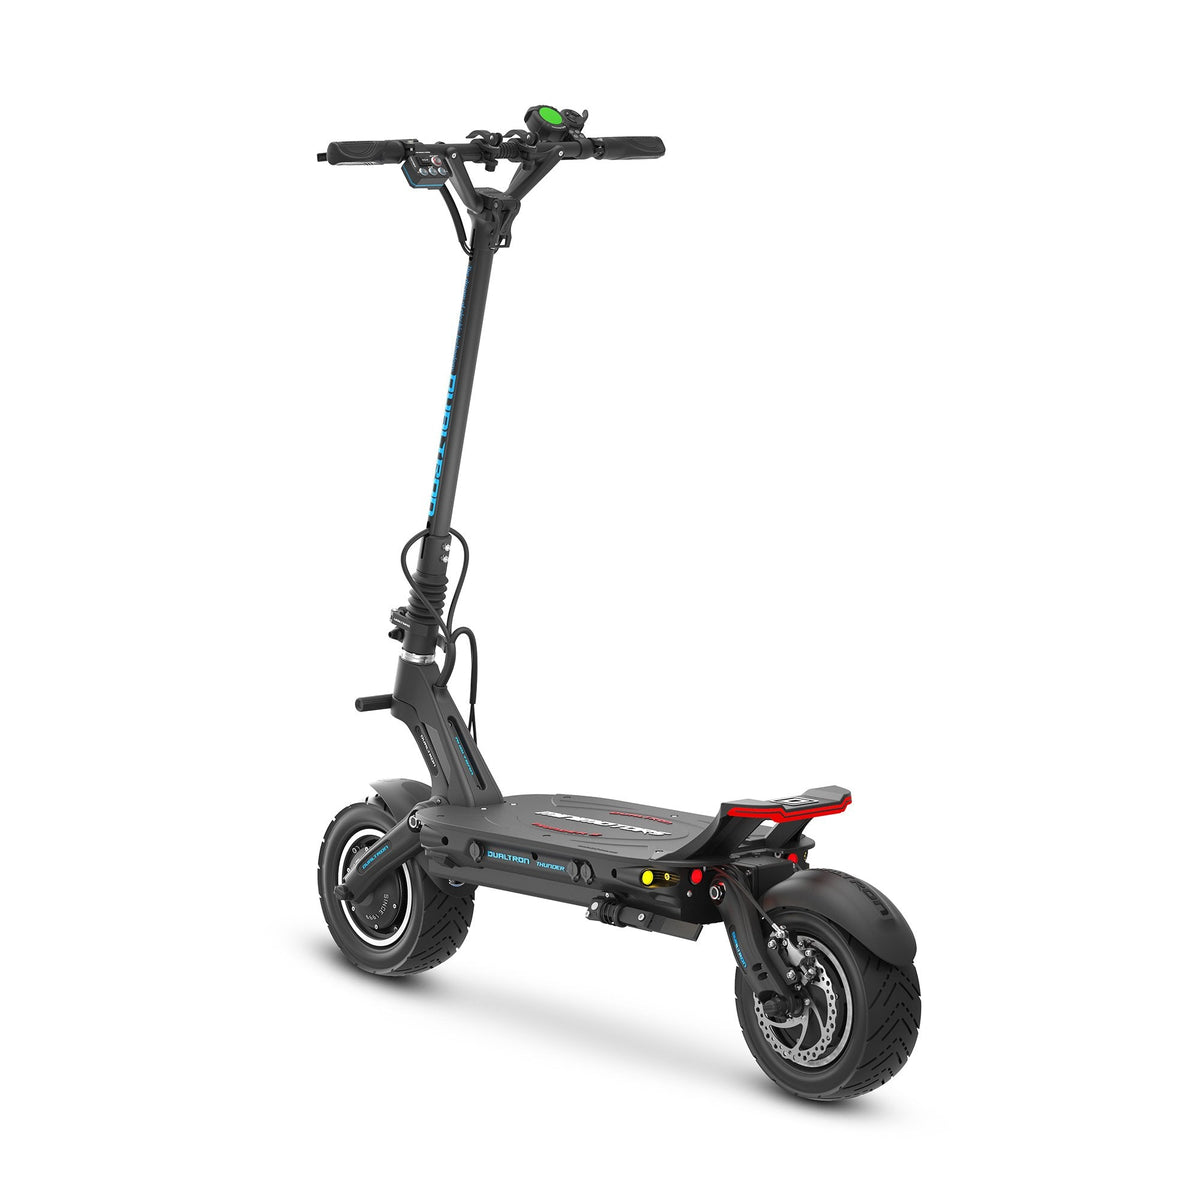 Dualtron Thunder 2 Electric Scooter Rear View